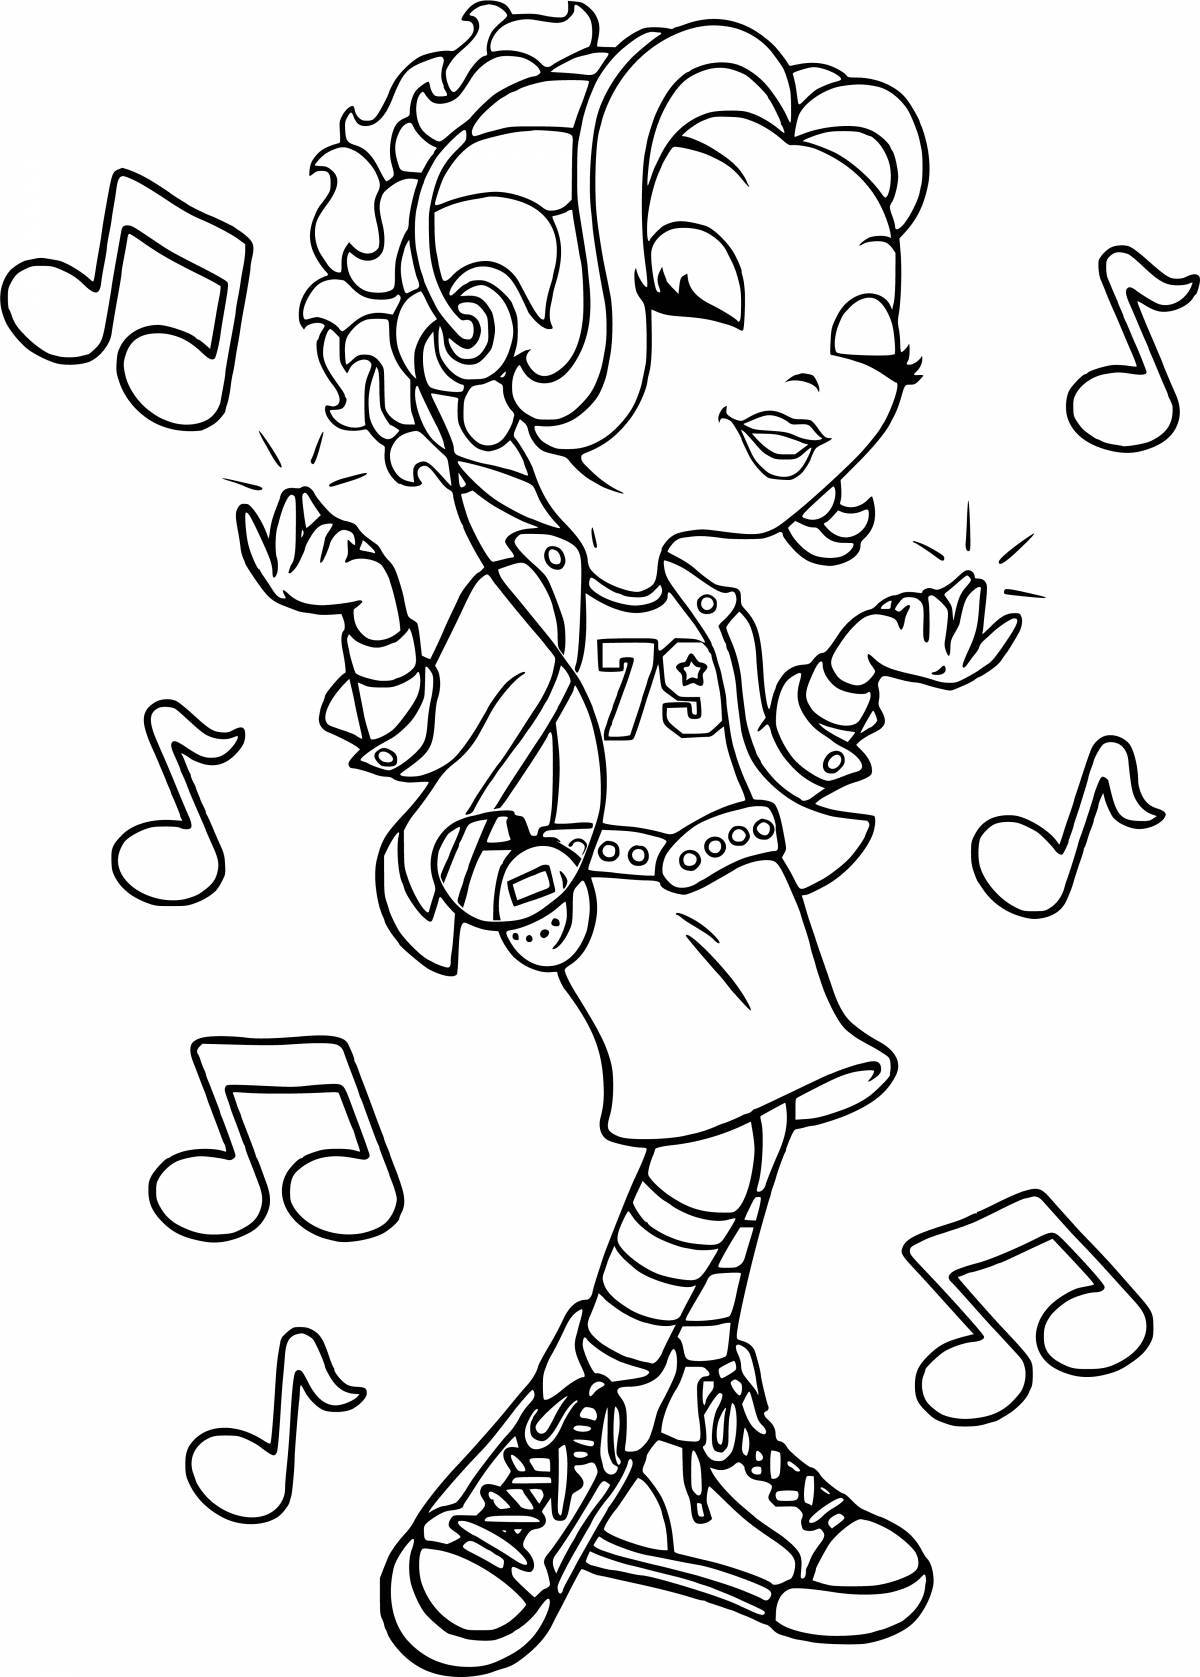 Adorable coloring pictures for girls 10 years old